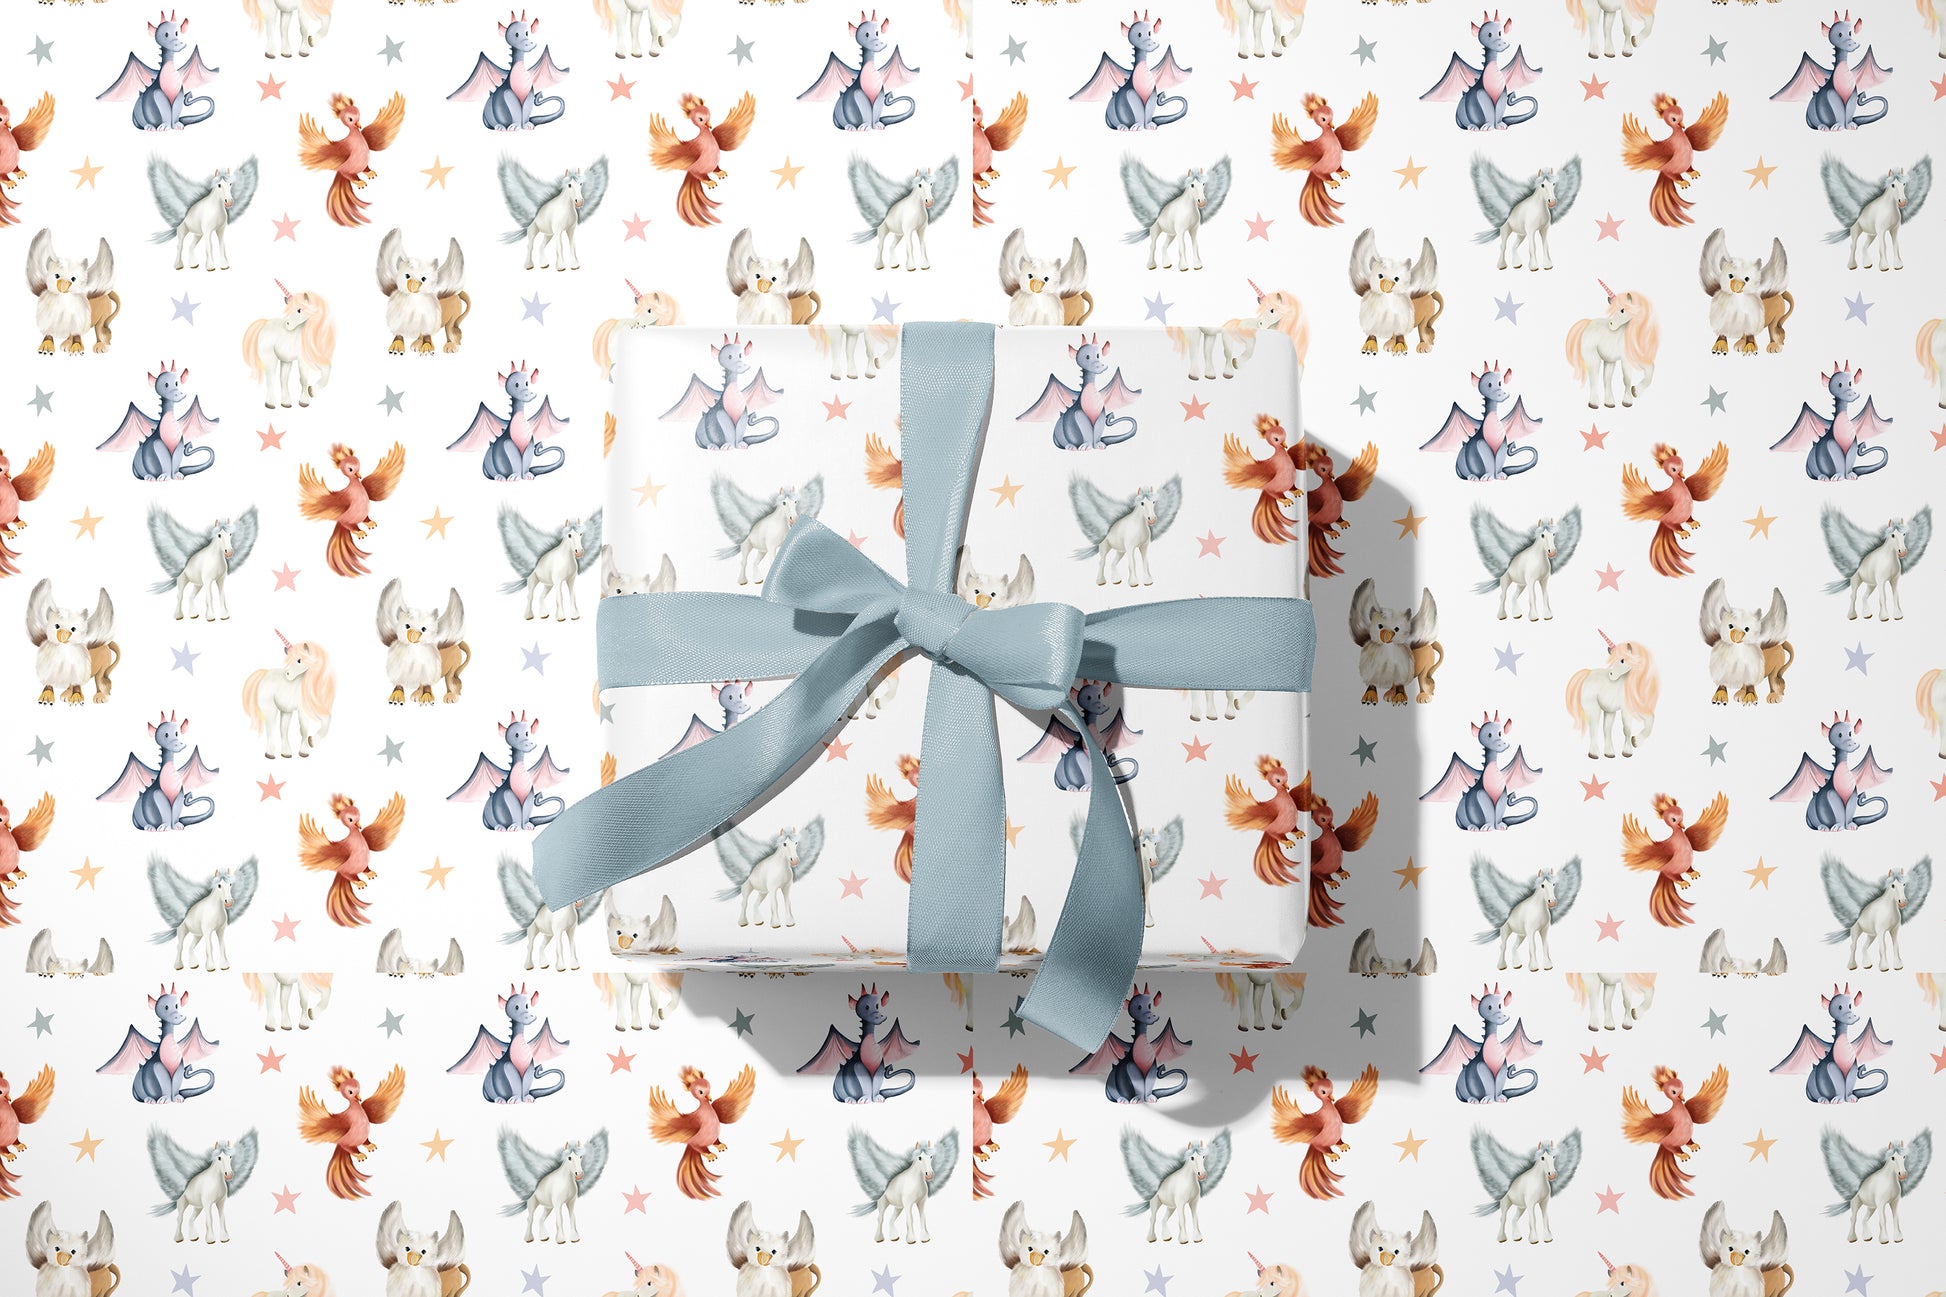 Mythical Creatures Wrapping Paper - Studio Q - Art by Nicky Quartermaine Scott